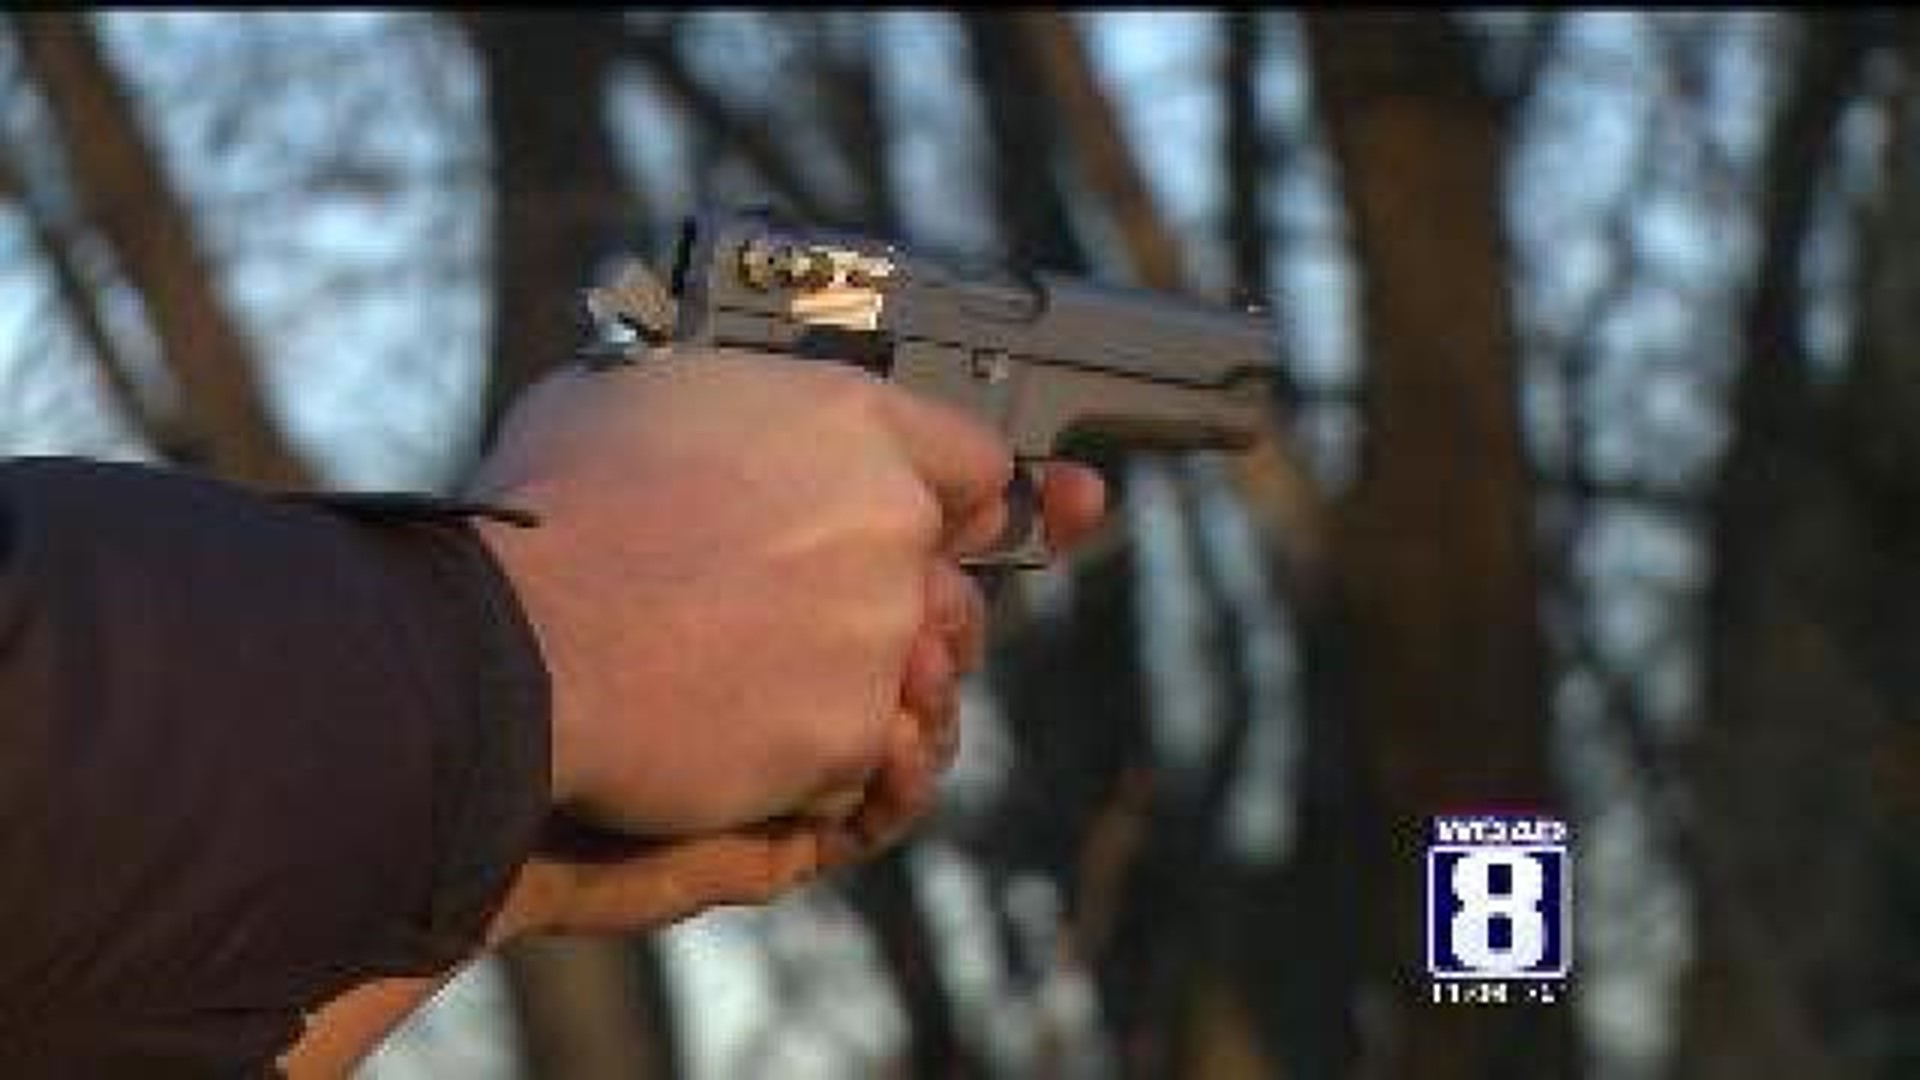 Illinois Senate considering propsoal for concealed carry